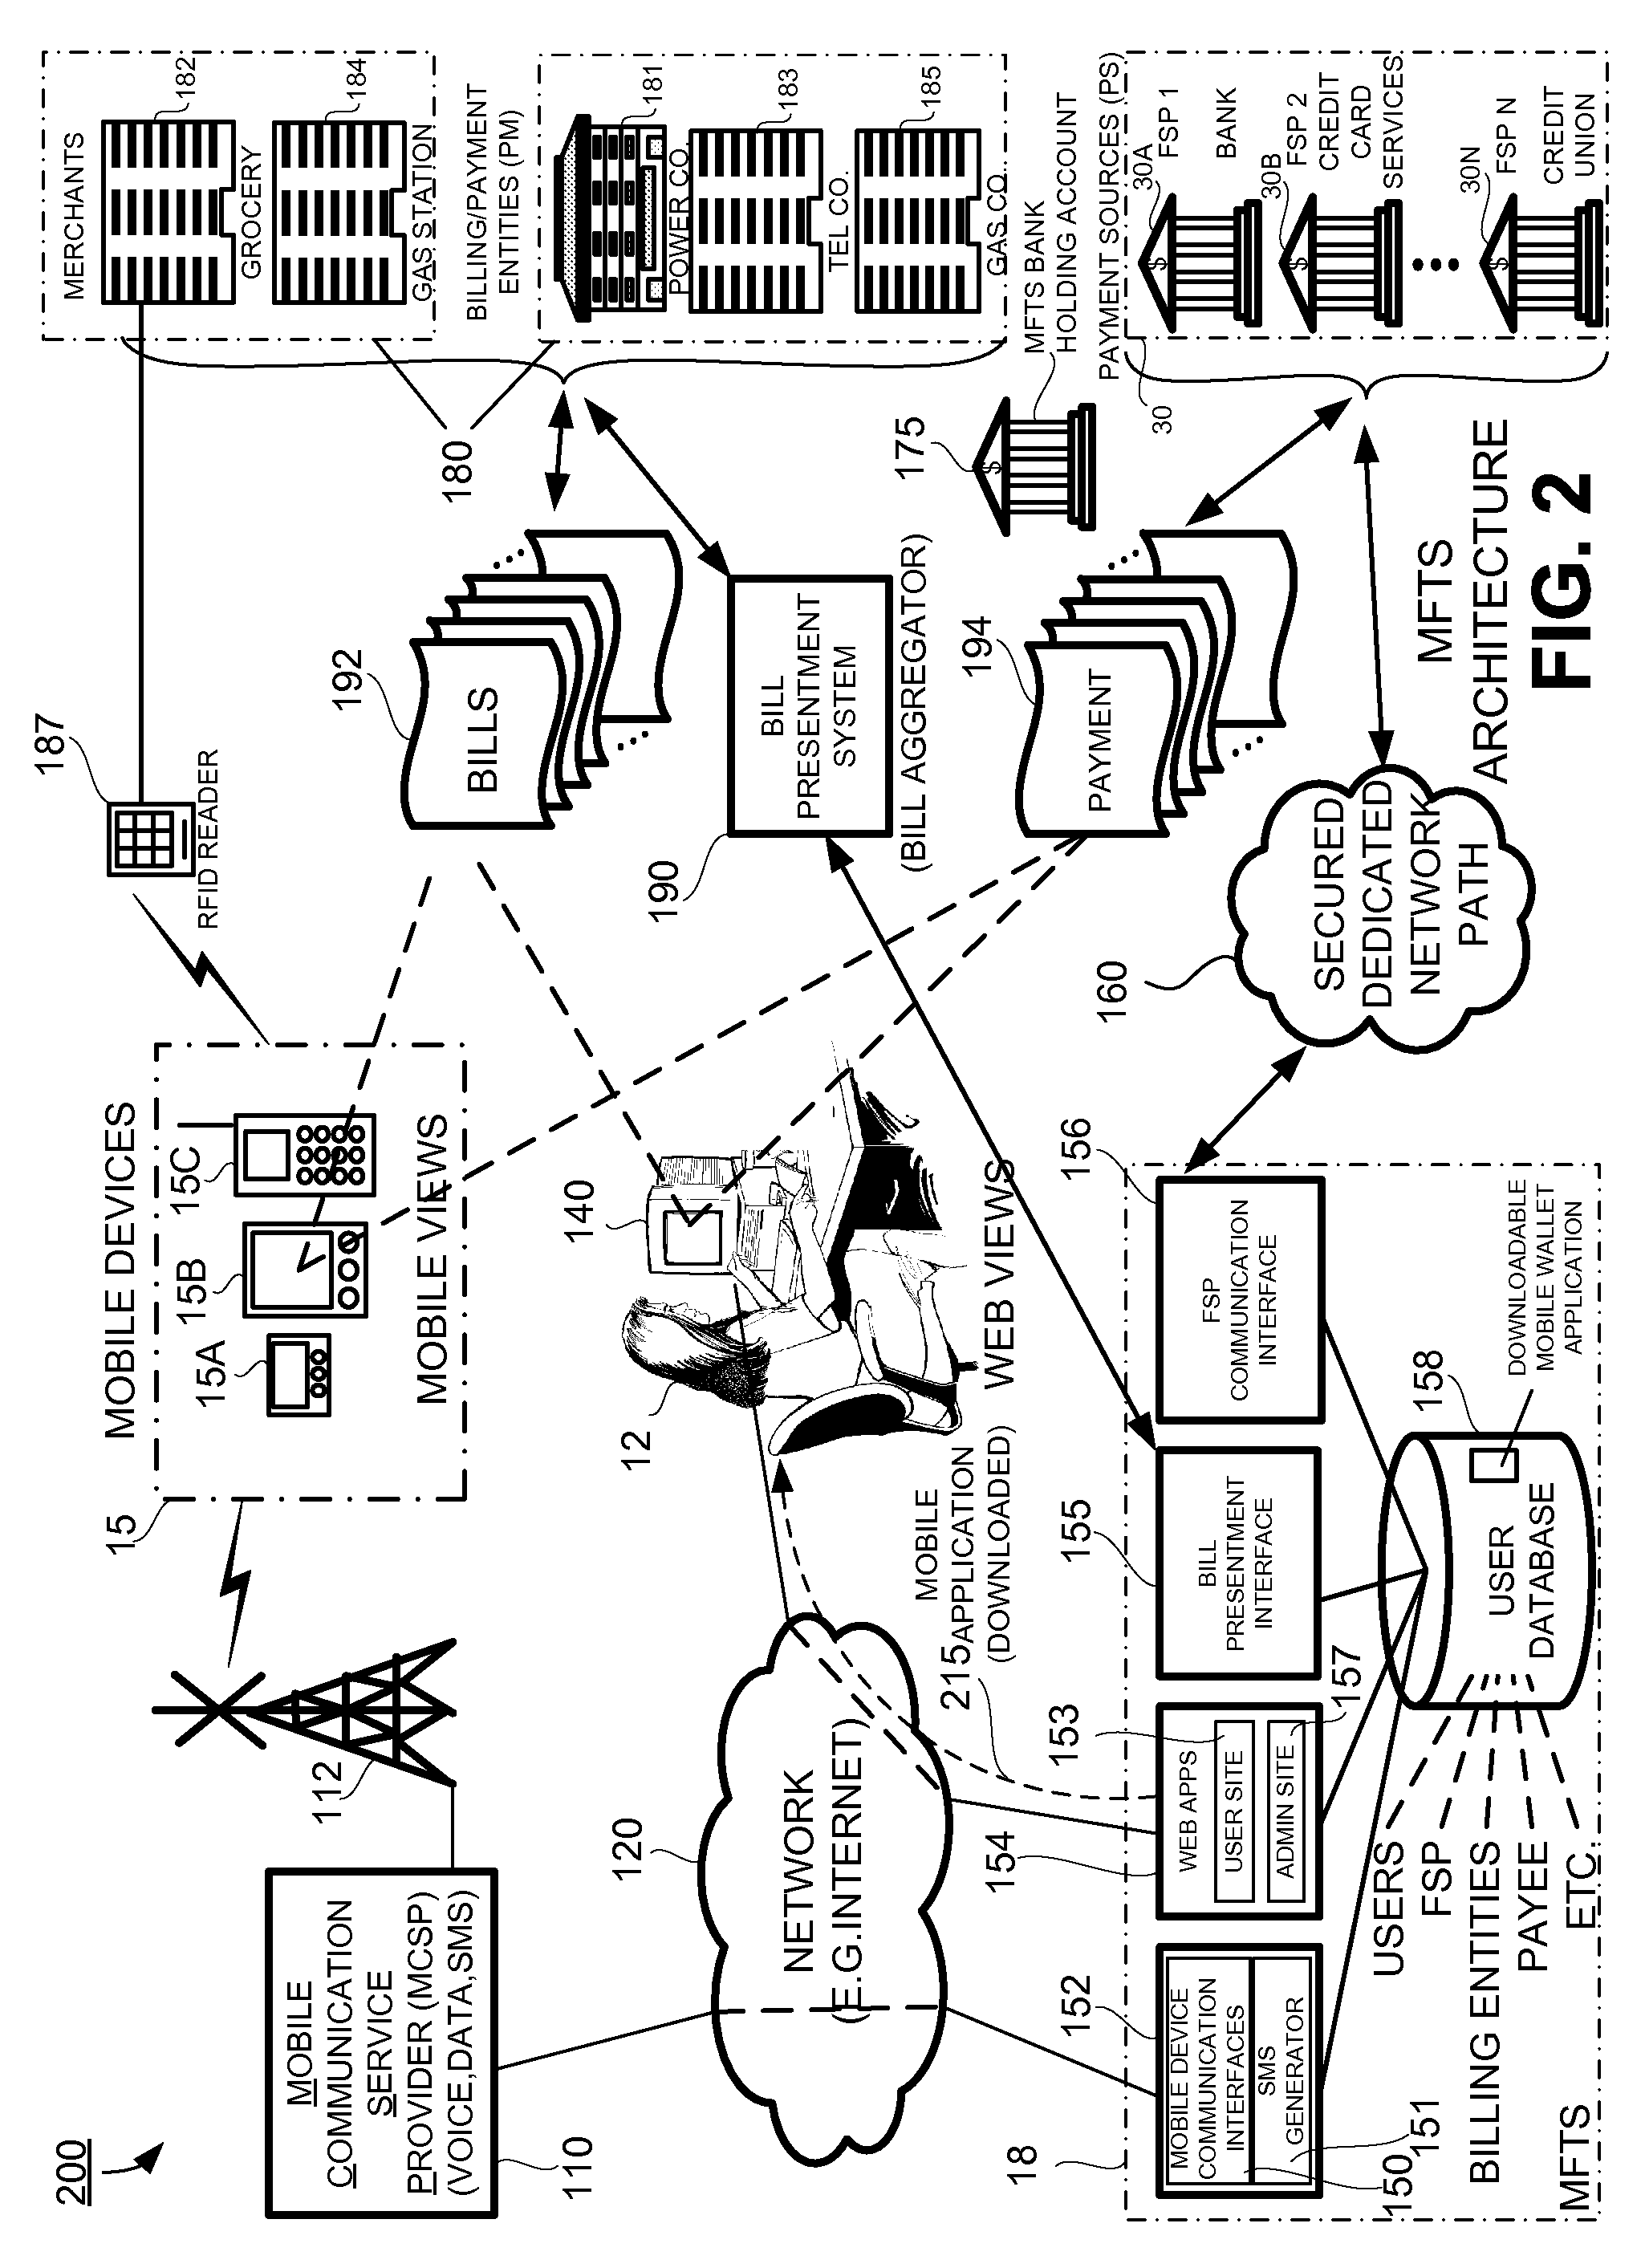 Methods and Systems For Making a Payment Via a Paper Check in a Mobile Environment